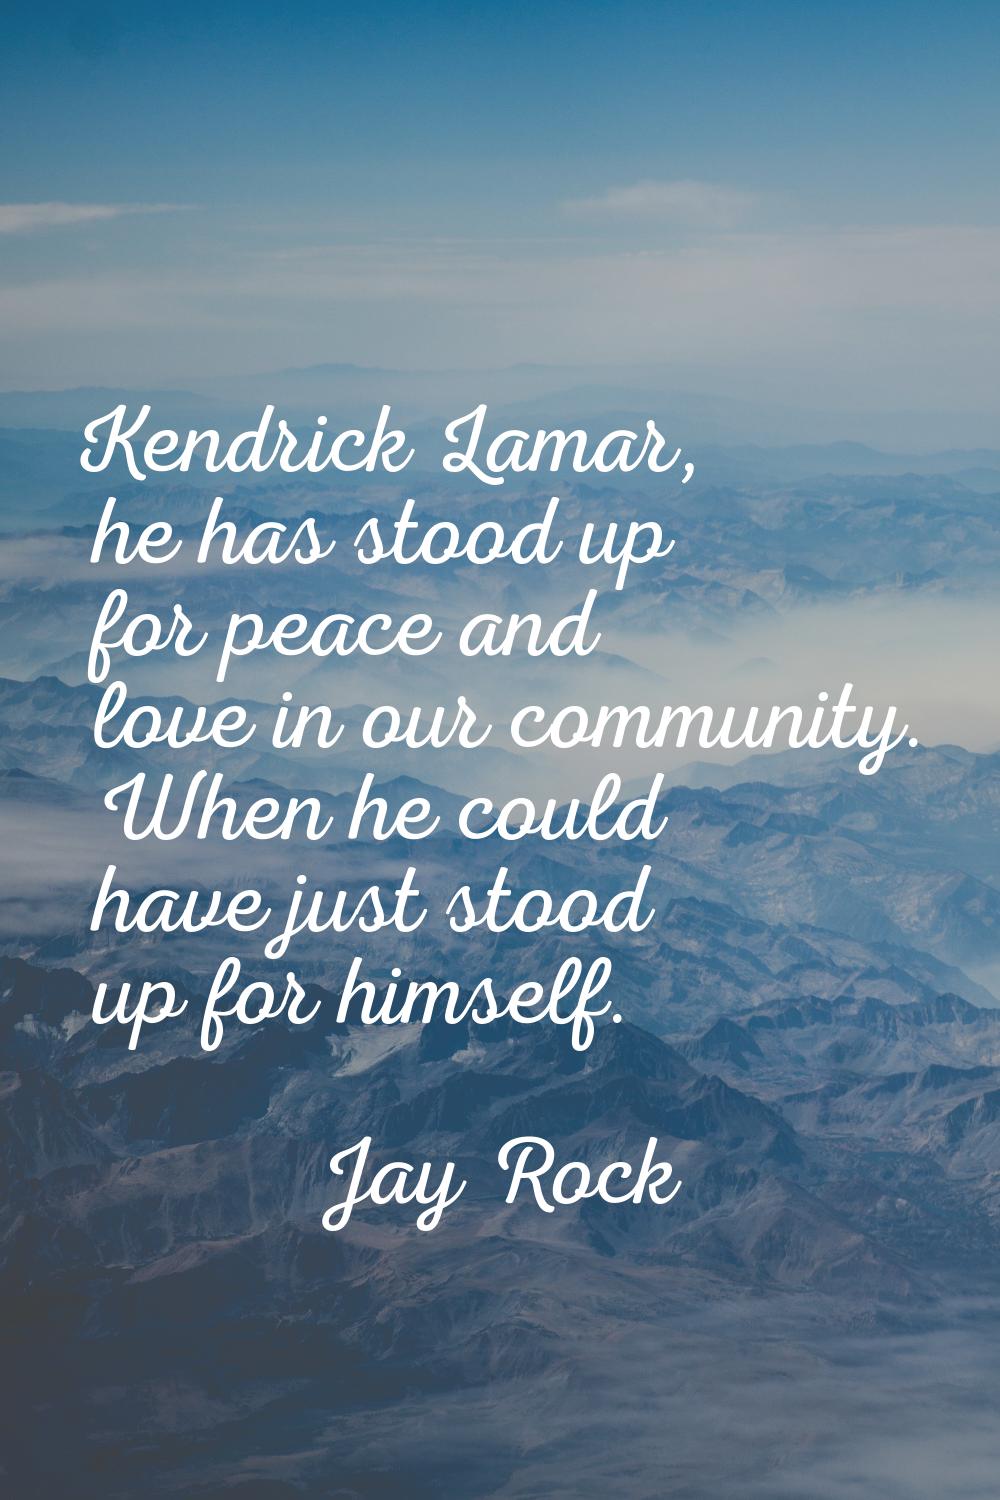 Kendrick Lamar, he has stood up for peace and love in our community. When he could have just stood 